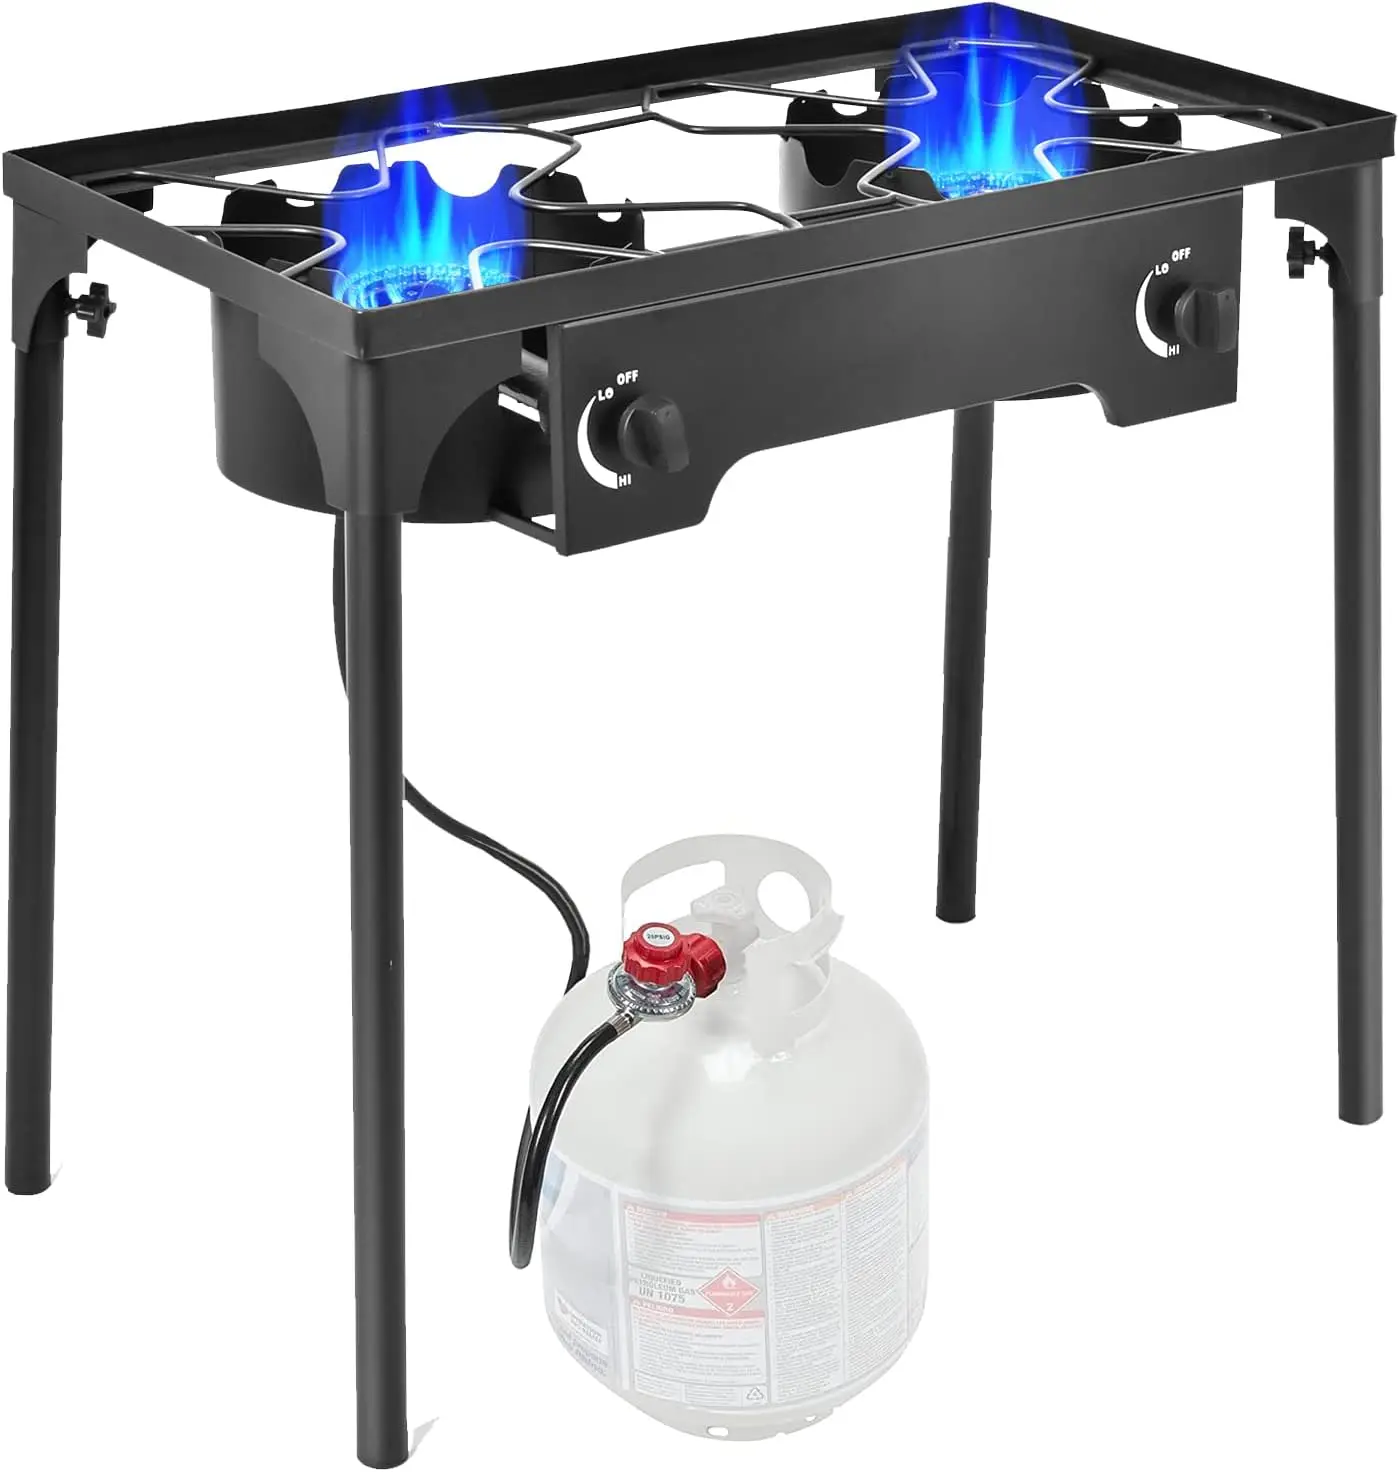 

Goplus Outdoor Camping Stove, Dual Burner Propane Gas Cooker w/Detachable Legs & 0-20 PSI Regulator CSA Approval for Camp Paito